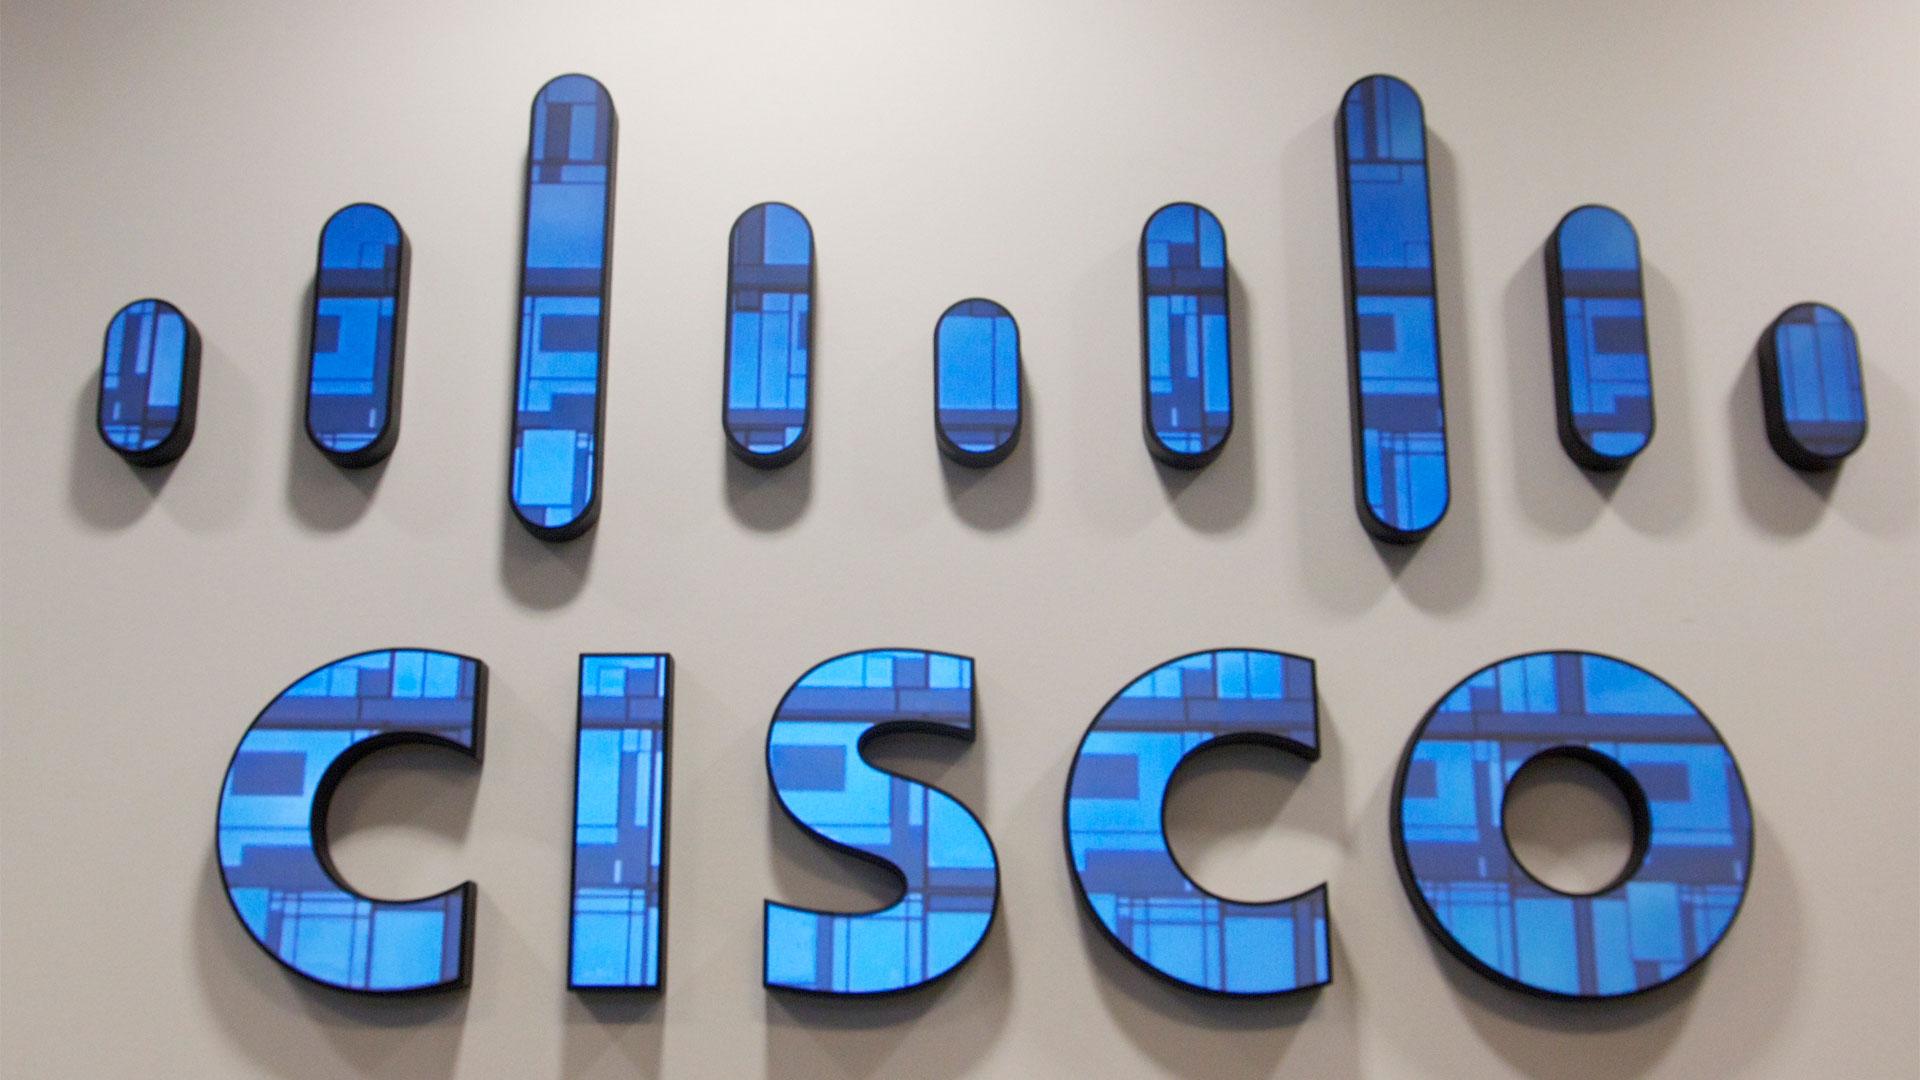 Cisco Discovers Stronger Attacks on Security